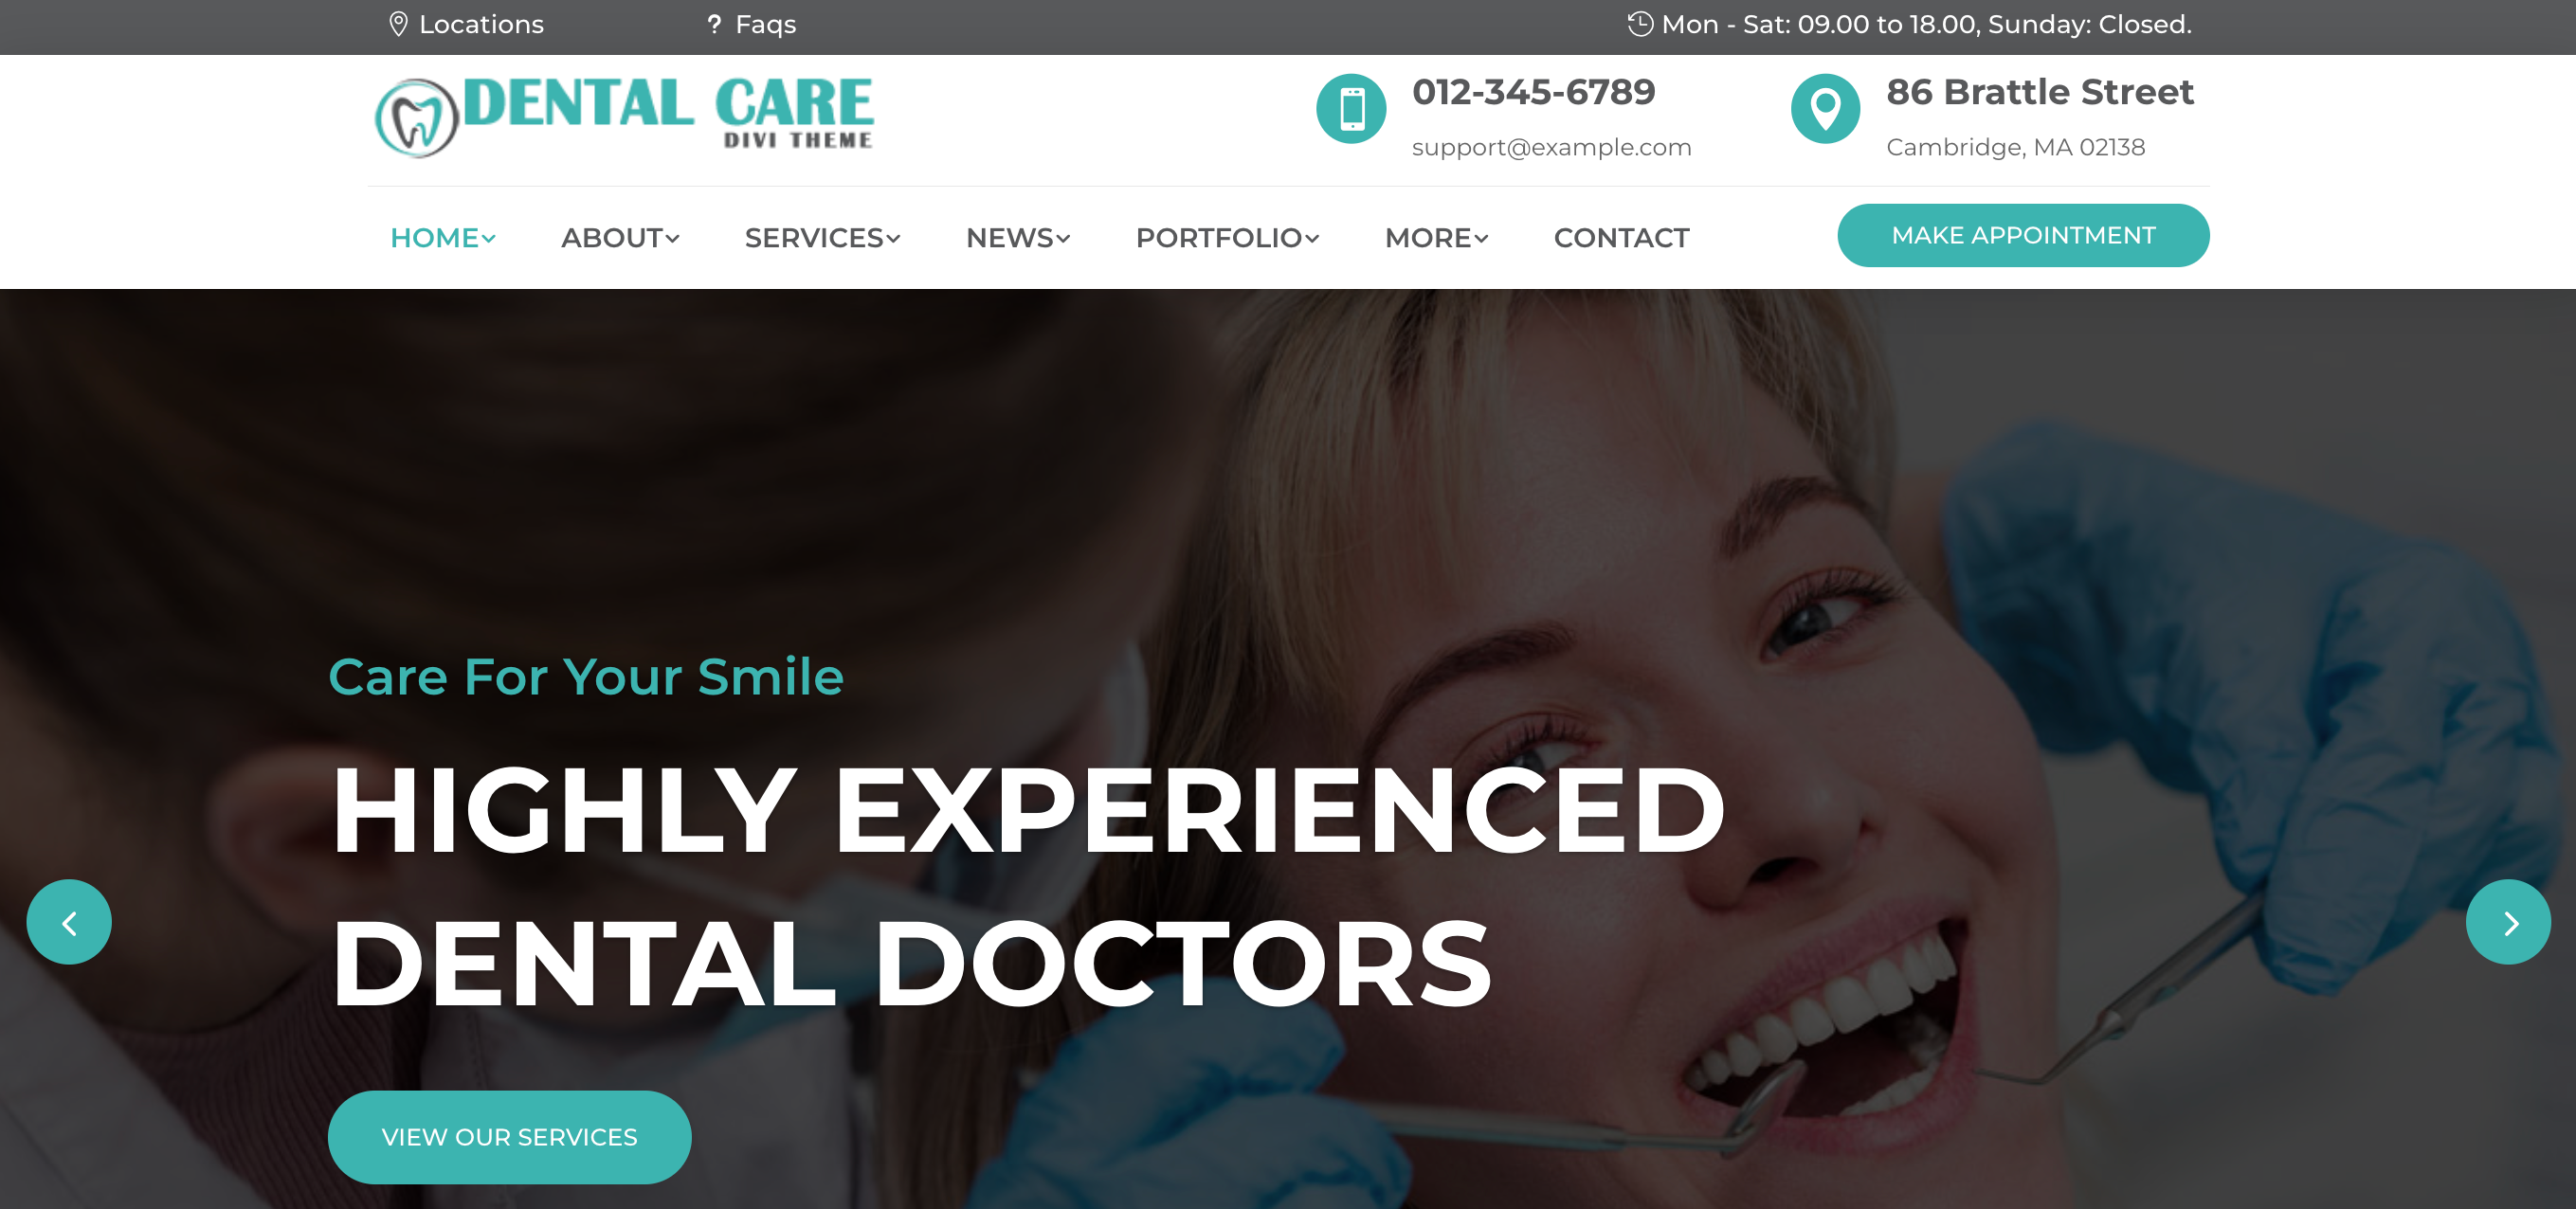 website templates for physicians